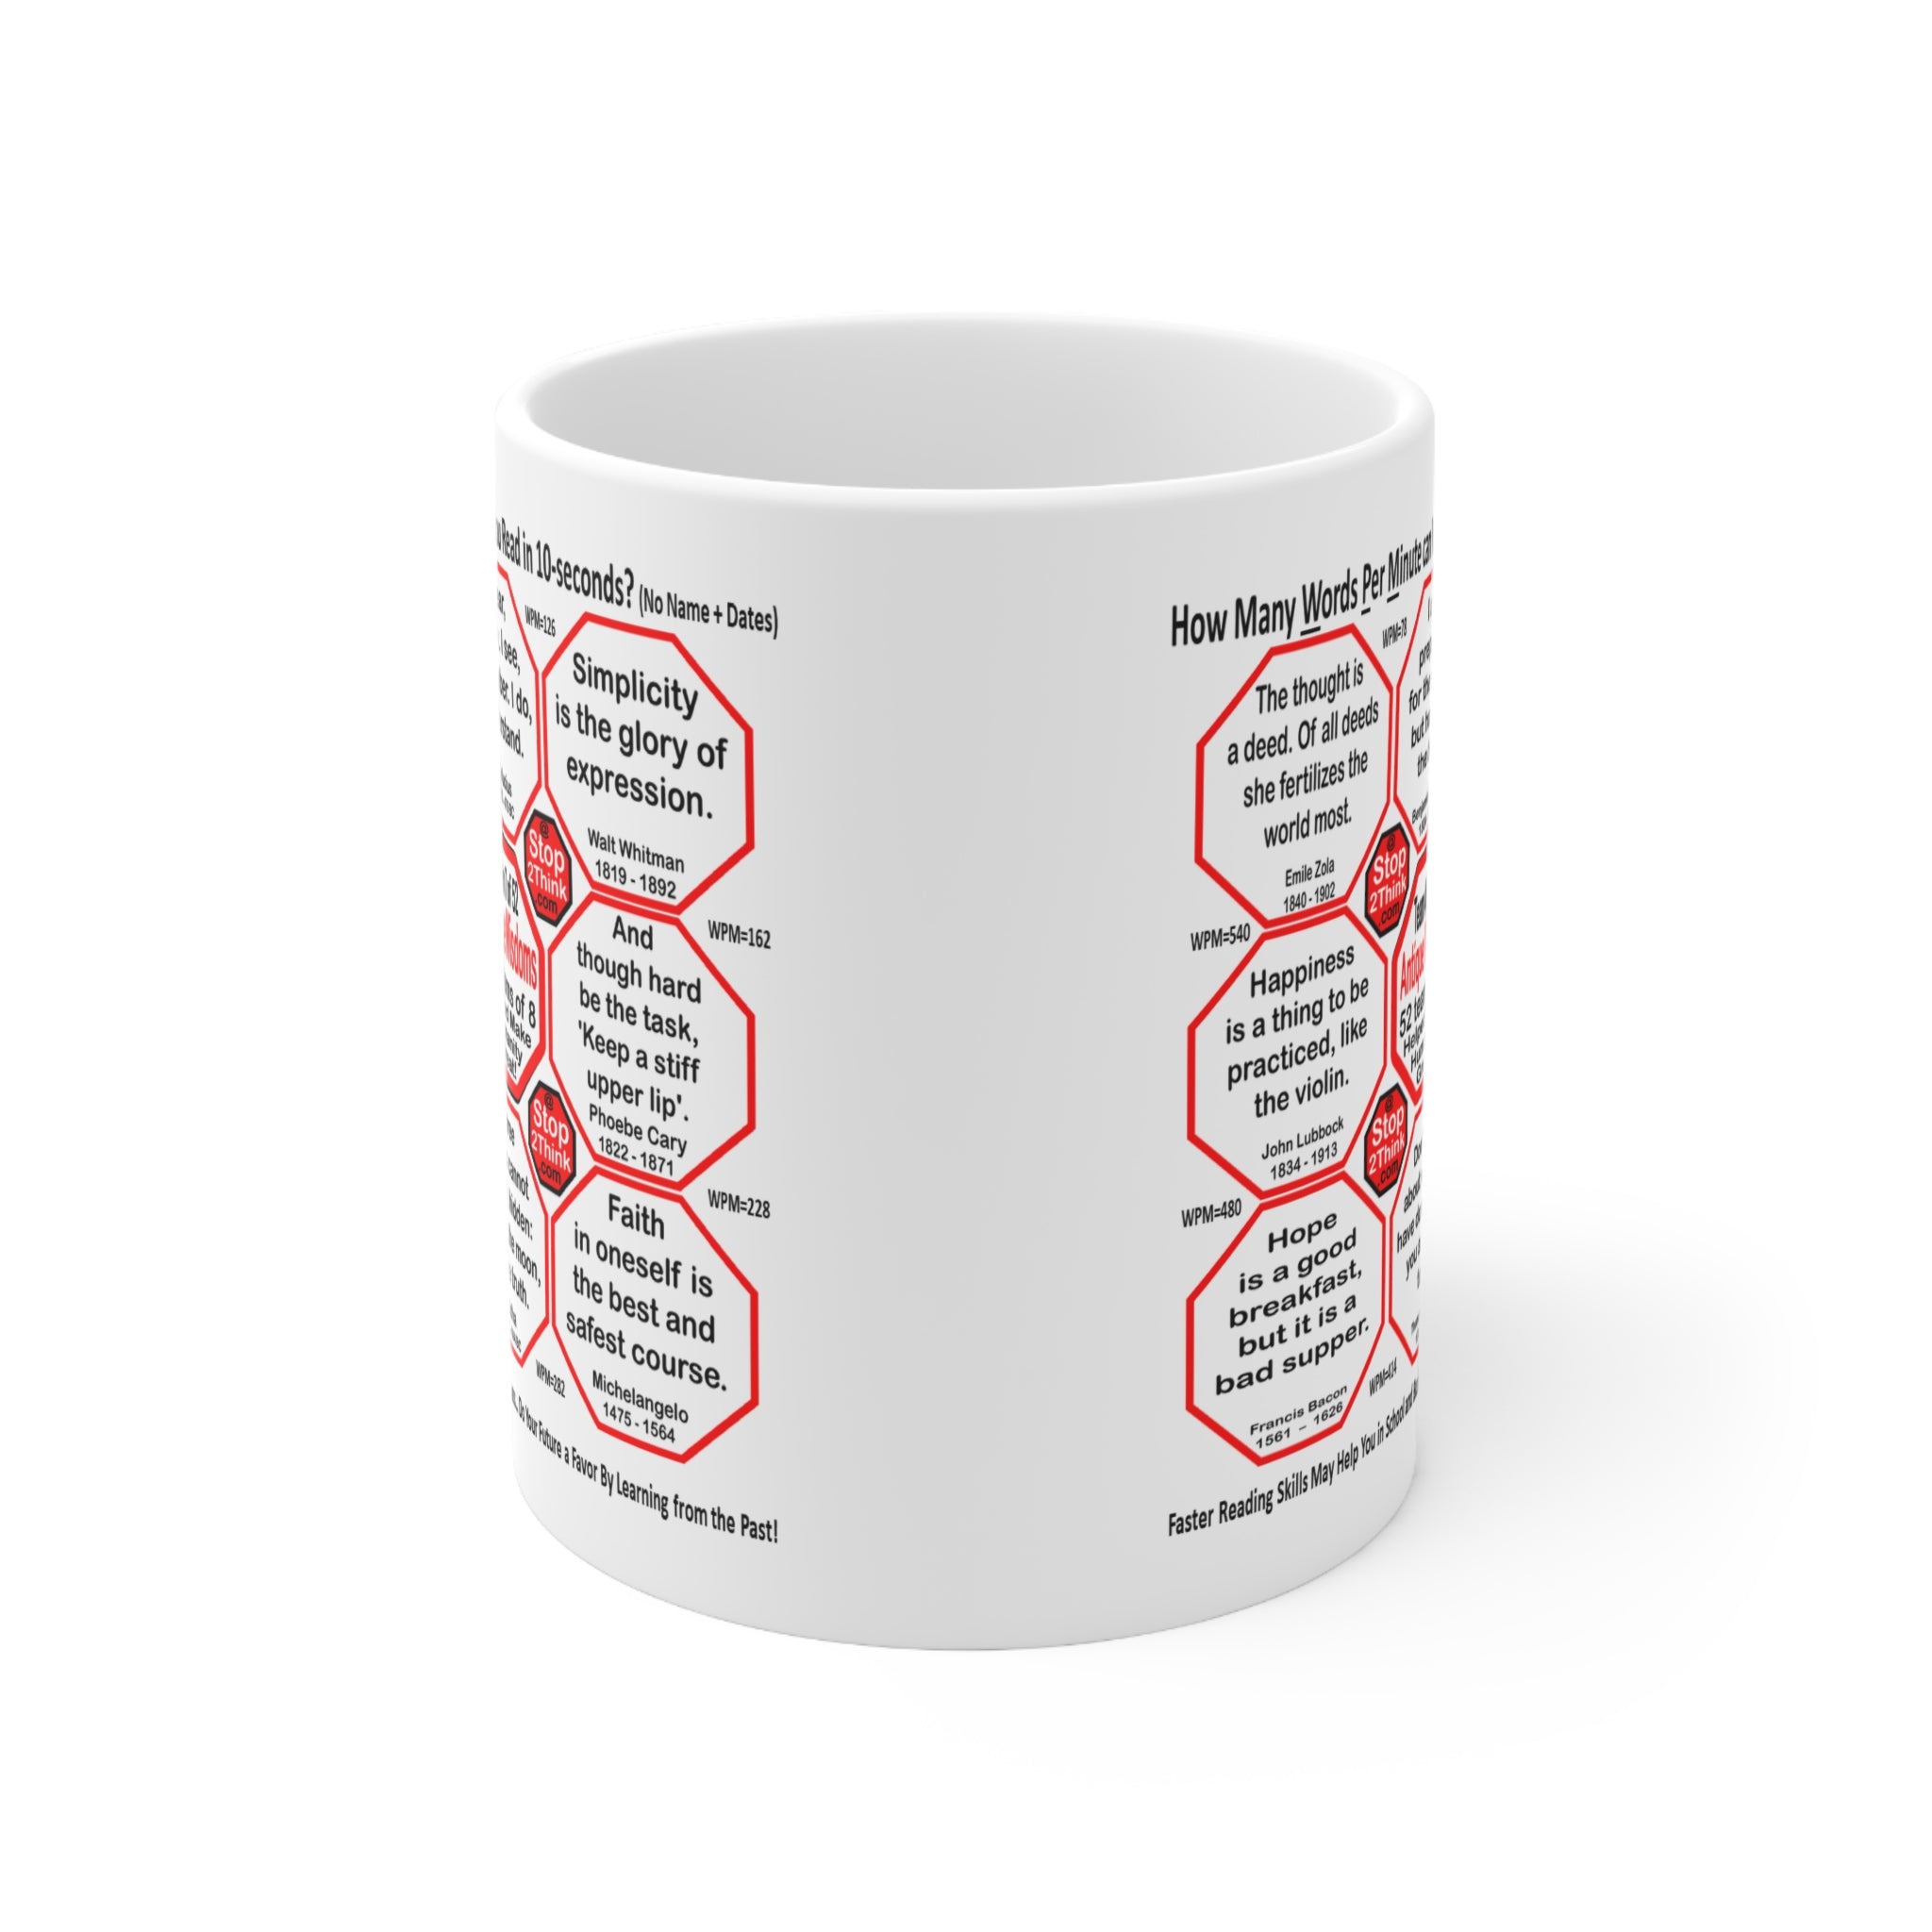 How Fast Can You Read Mug Wisdoms?   ...Teams 7+46 of 52   - Drink Wisely at Stop2Think.com